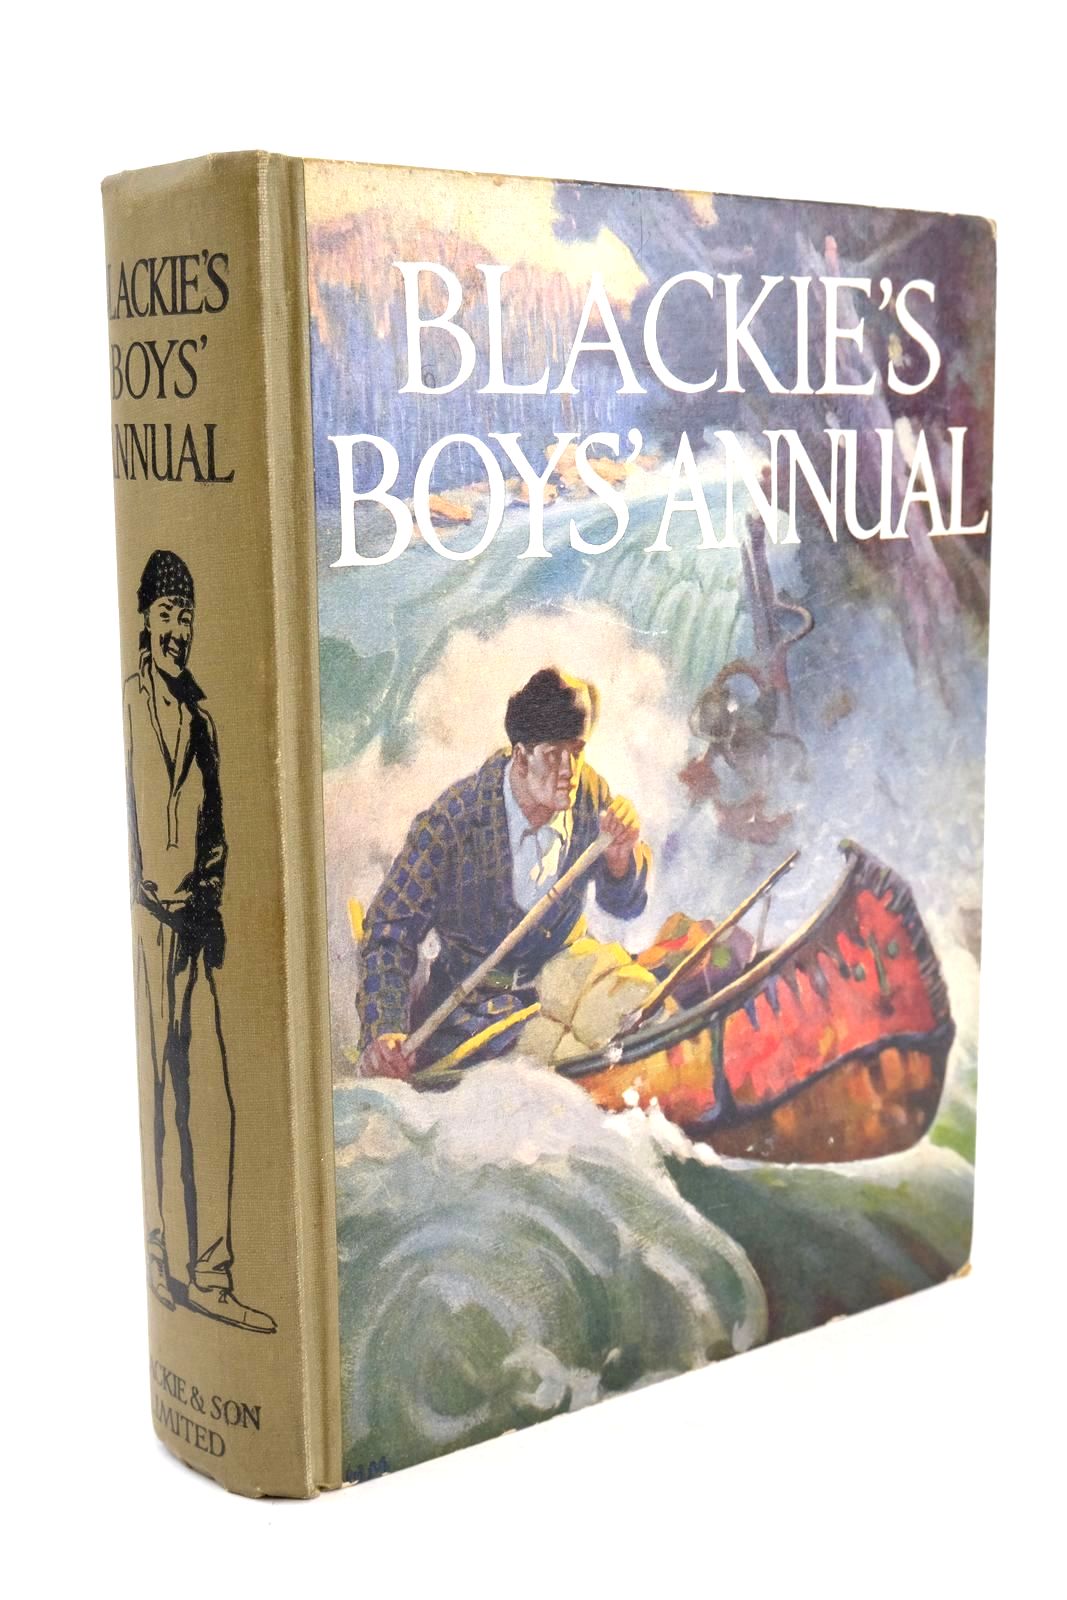 Photo of BLACKIE'S BOYS' ANNUAL written by Bird, Richard
Westerman, Percy F.
et al, illustrated by Henry, Thomas
Prater, Ernest
Reynolds, Warwick
et al., published by Blackie & Son Ltd. (STOCK CODE: 1325091)  for sale by Stella & Rose's Books